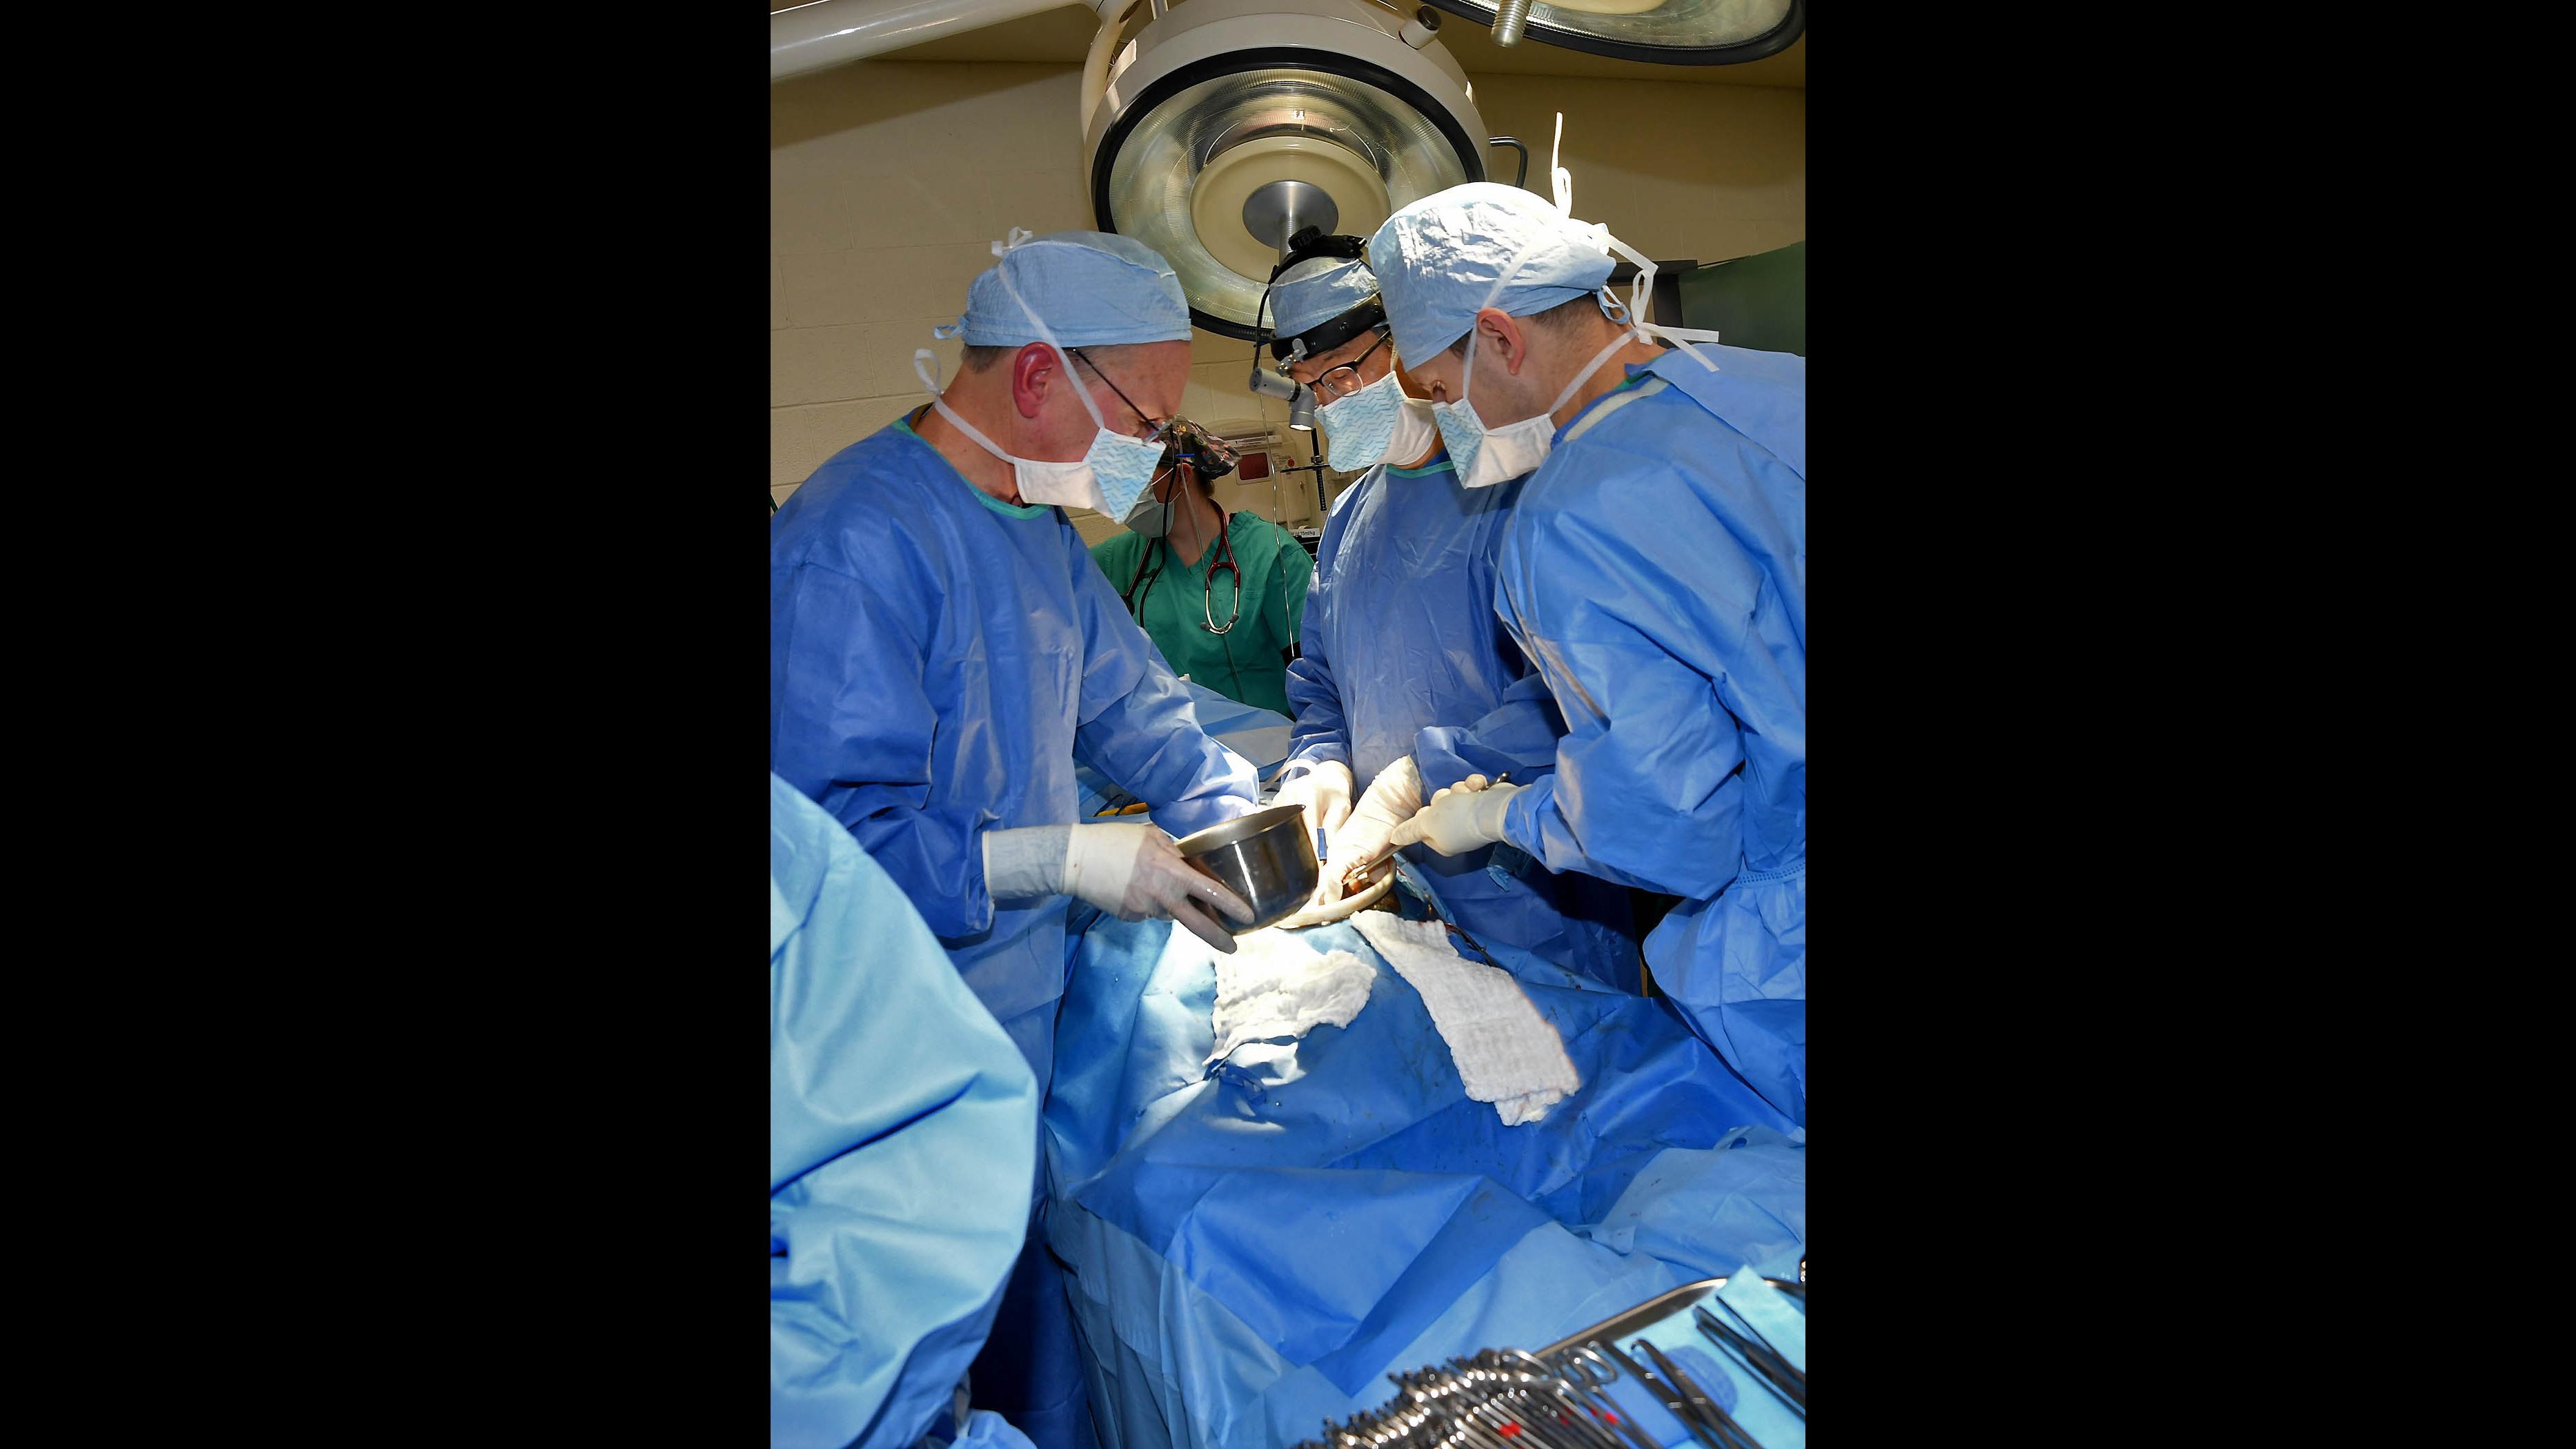 Amita Health general surgeons Eric Yang and William Frymark perform an emergency appendectomy on Ben, a 40-year-old orangutan at Brookfield Zoo. (Jim Schulz / Chicago Zoological Society)